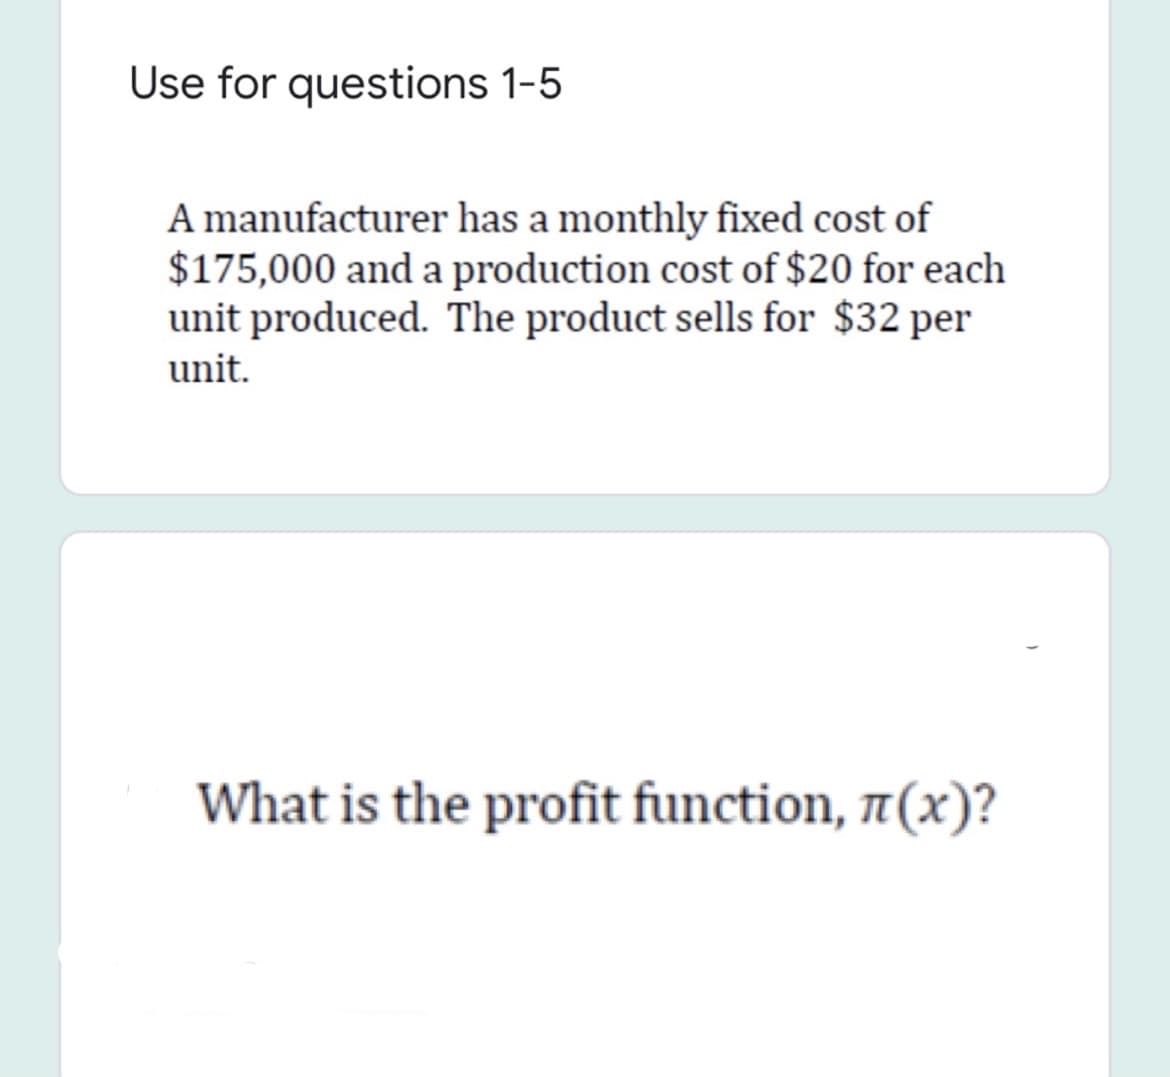 Use for questions 1-5
A manufacturer has a monthly fixed cost of
$175,000 and a production cost of $20 for each
unit produced. The product sells for $32 per
unit.
What is the profit function, 7(x)?
